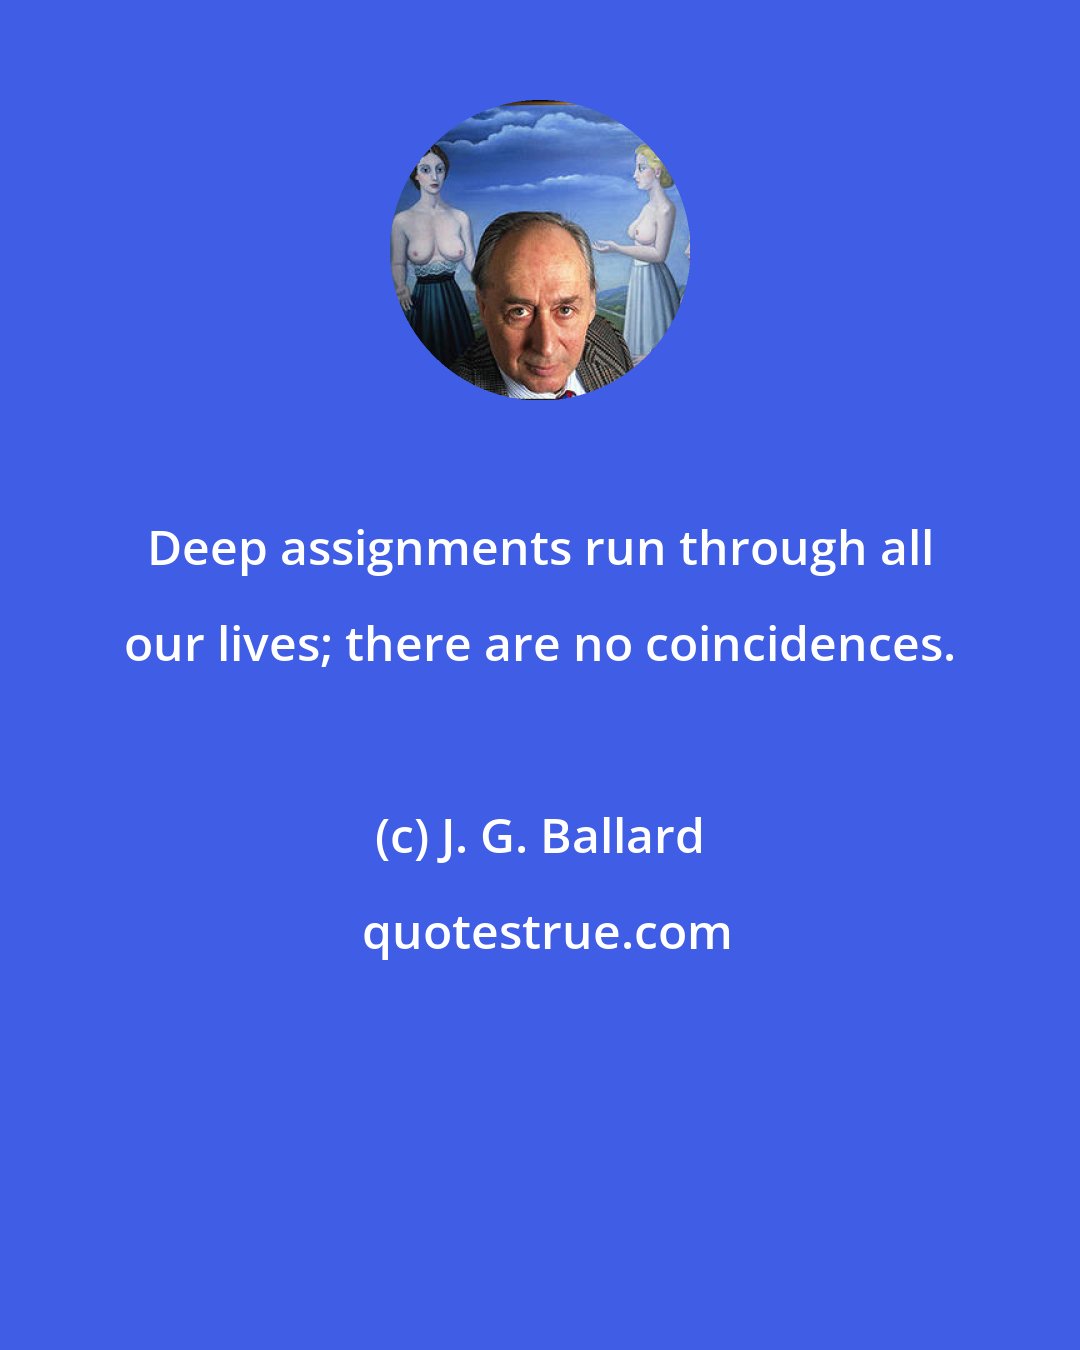 J. G. Ballard: Deep assignments run through all our lives; there are no coincidences.